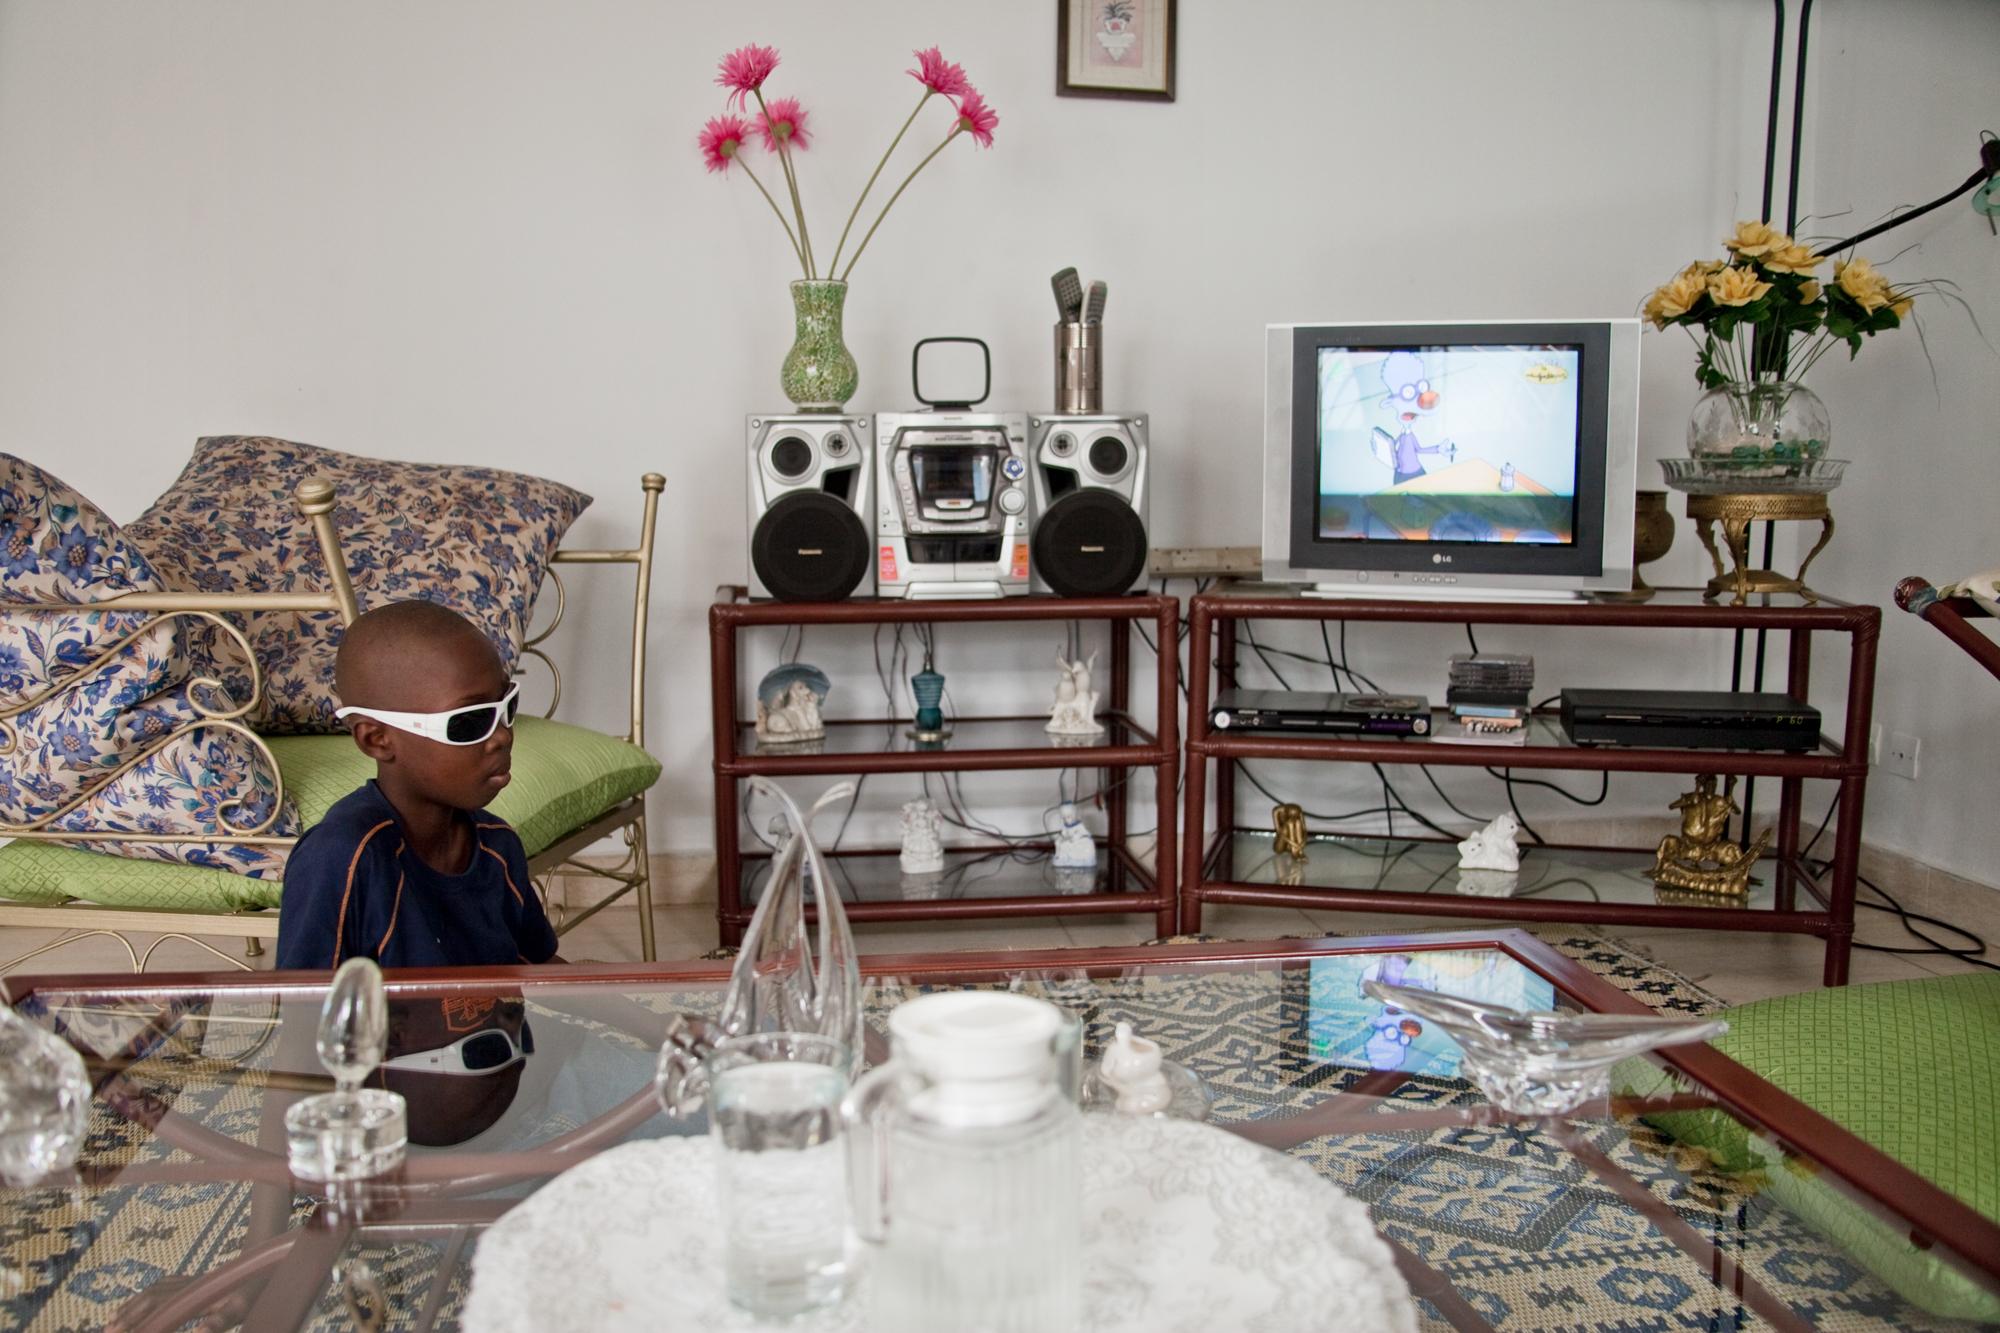 Roxal, age 10, a student from the INIPA school for the blind at home. Abidjan, Ivory Coast. 2010.